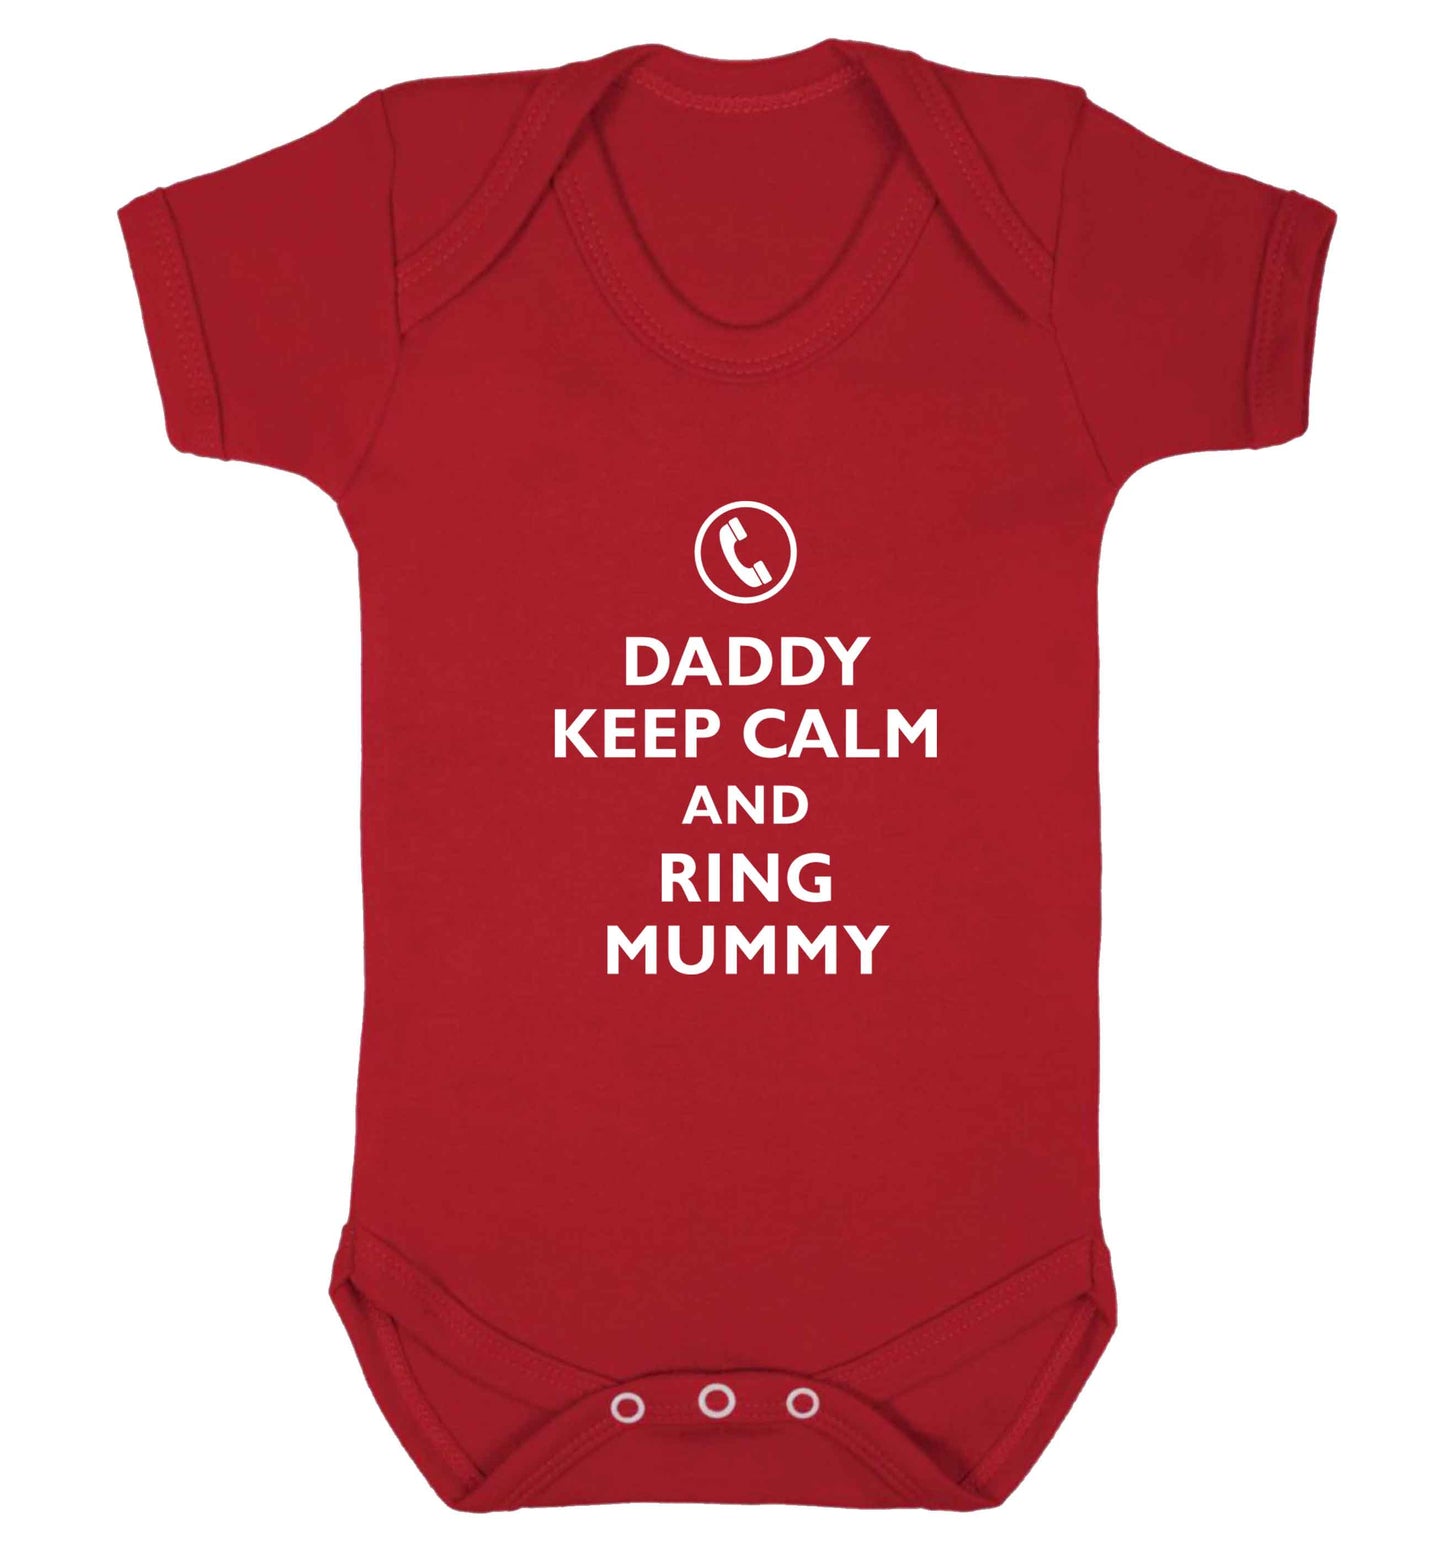 Daddy keep calm and ring mummy baby vest red 18-24 months